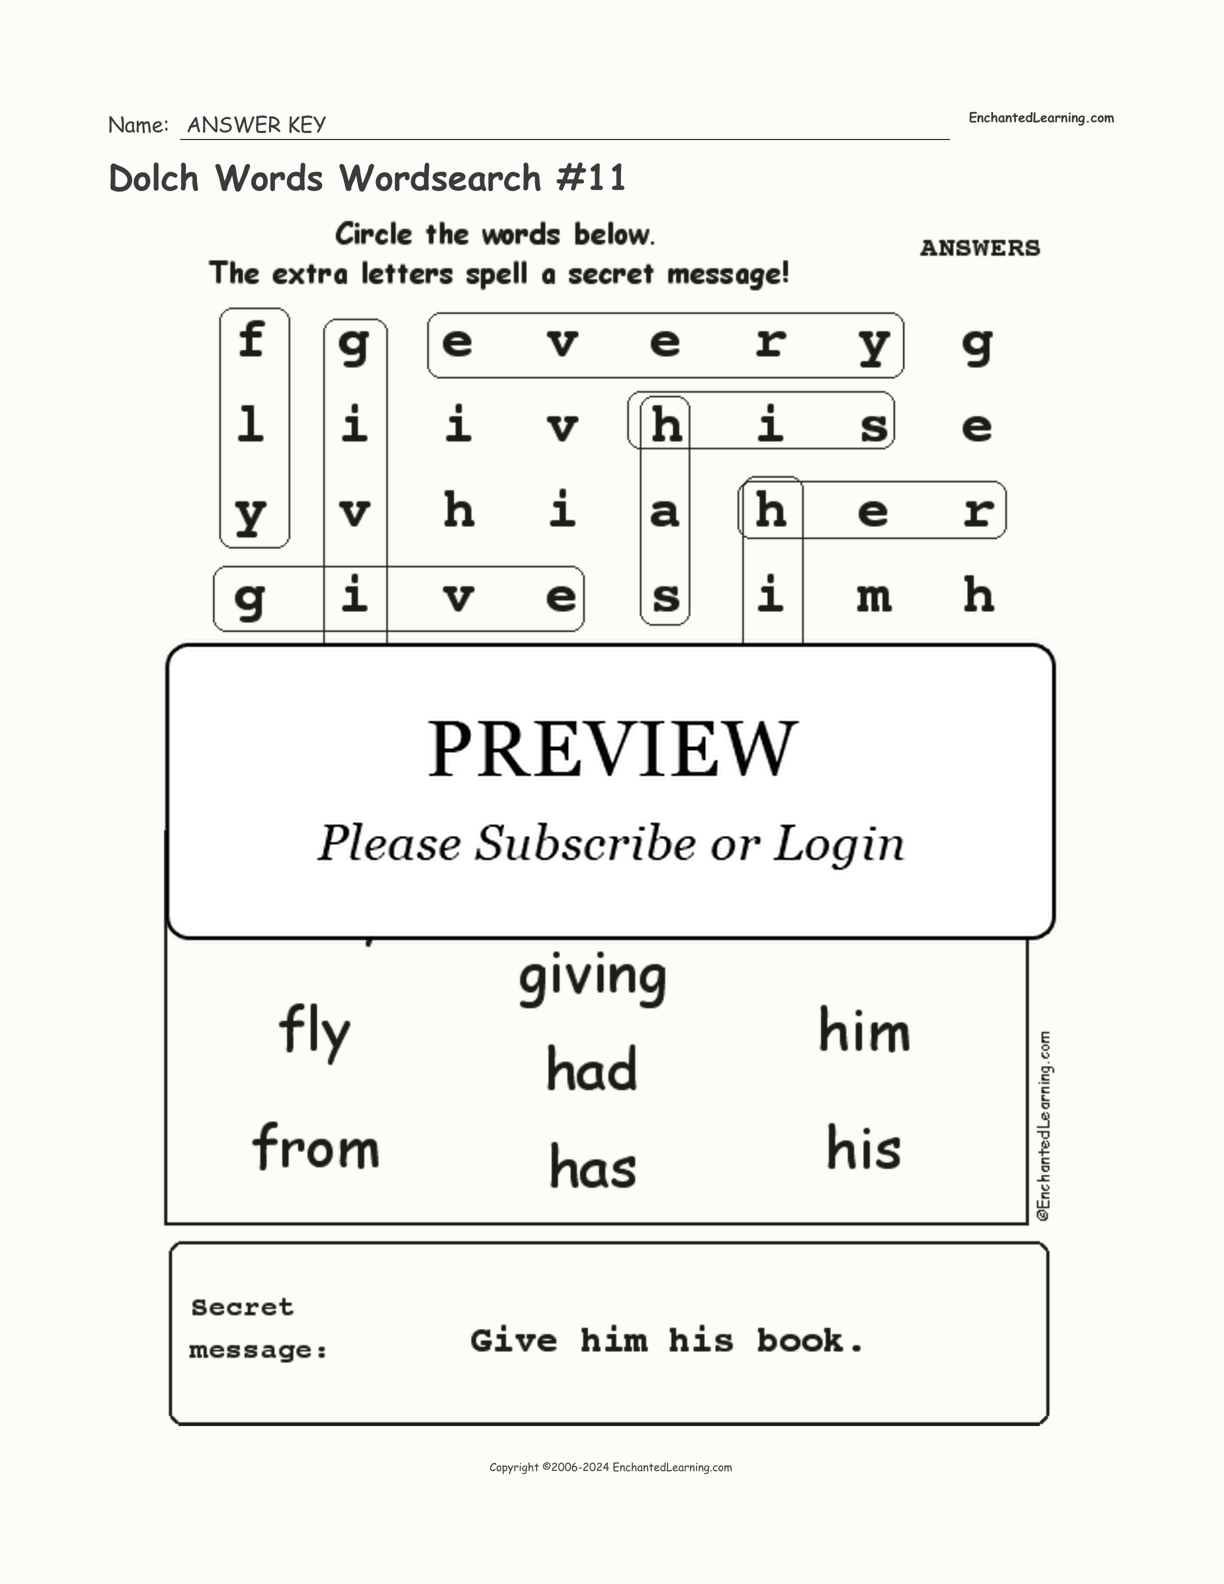 Dolch Words Wordsearch #11 interactive worksheet page 2